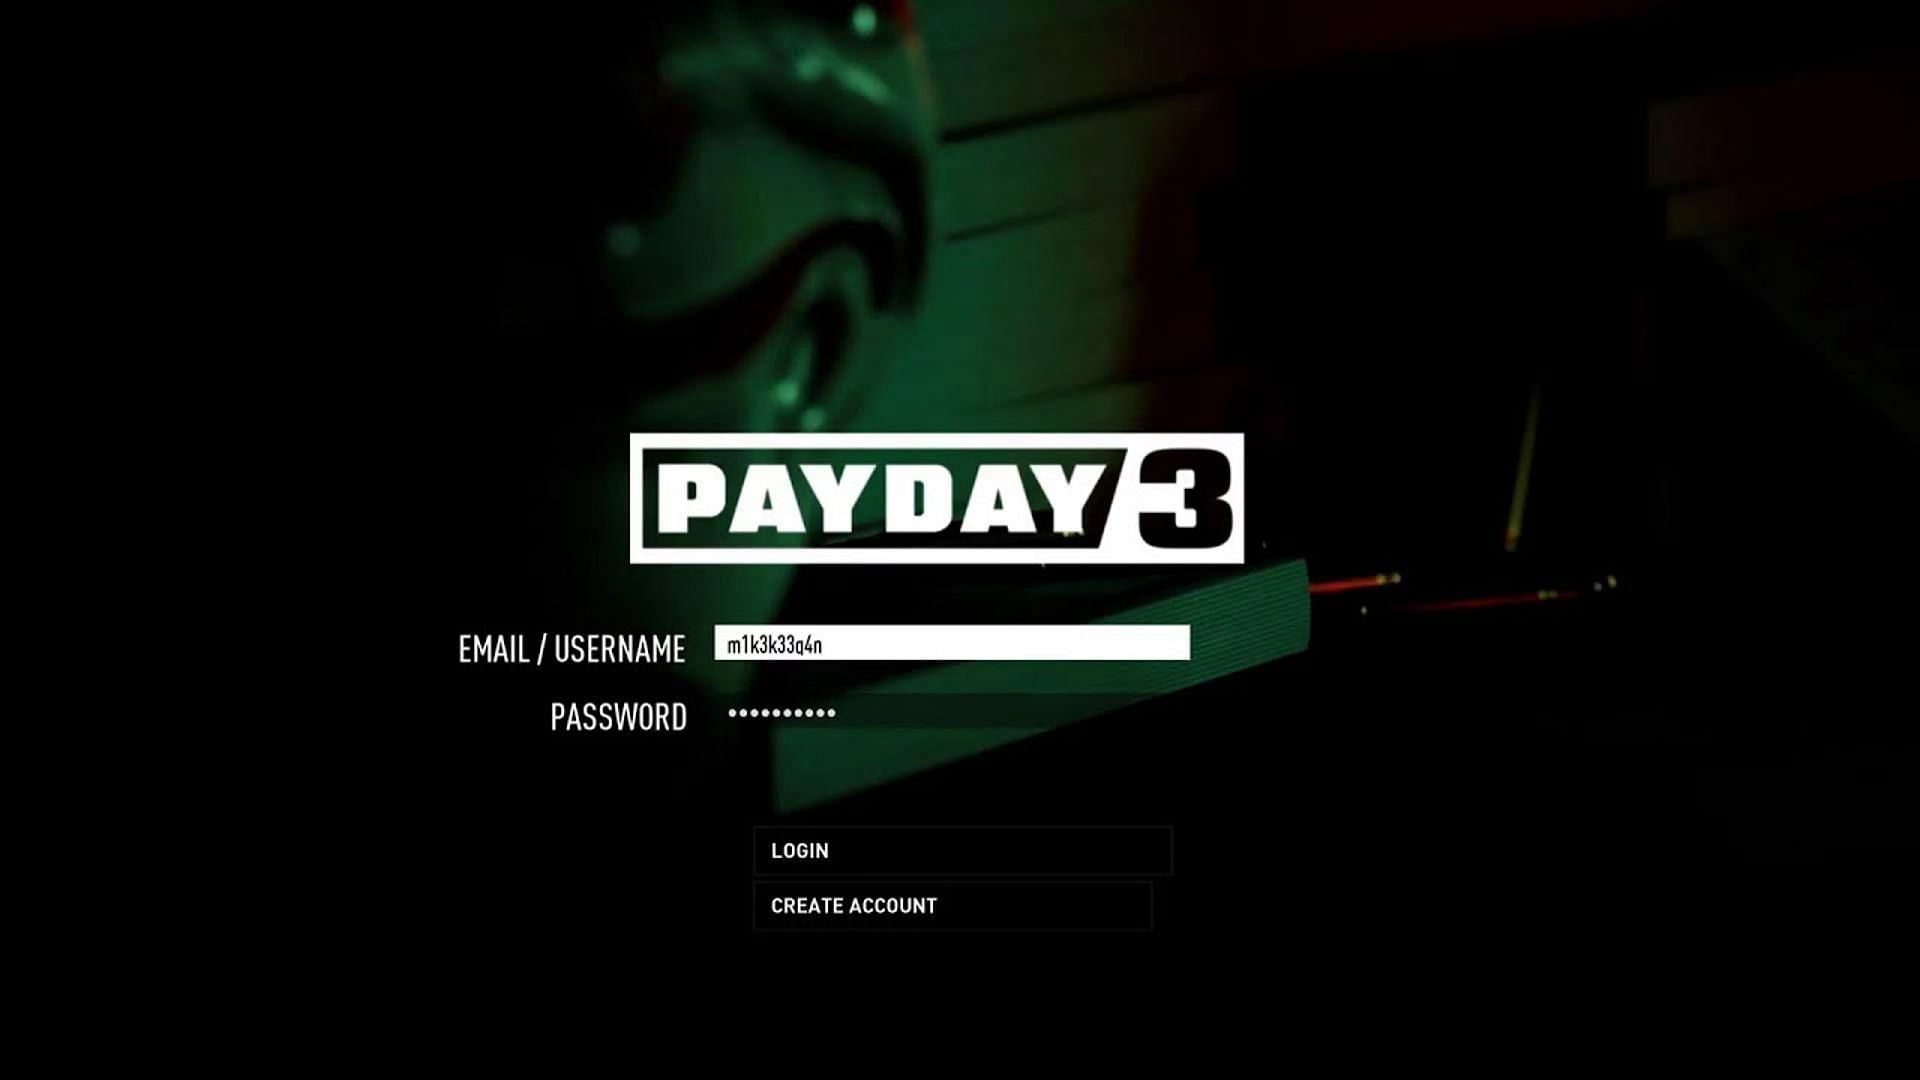 How to create an account to play Payday 3